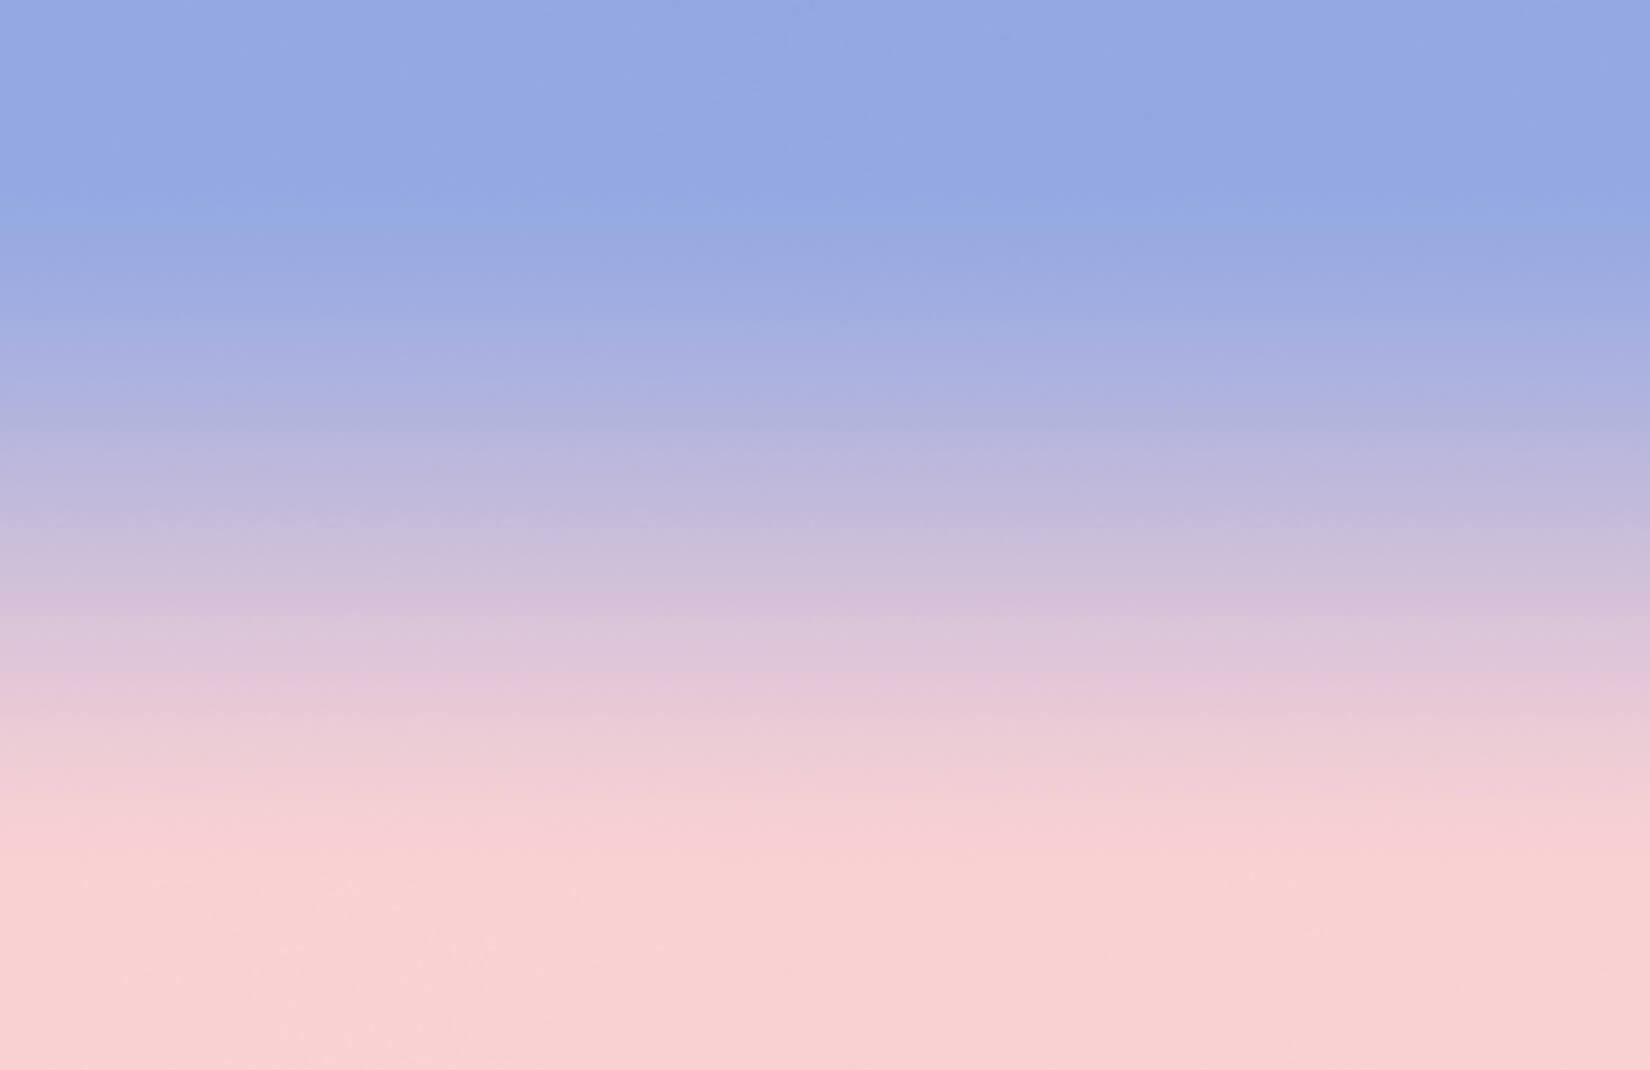 Blue and Pink Hair Ombre Backgrounds - wide 2